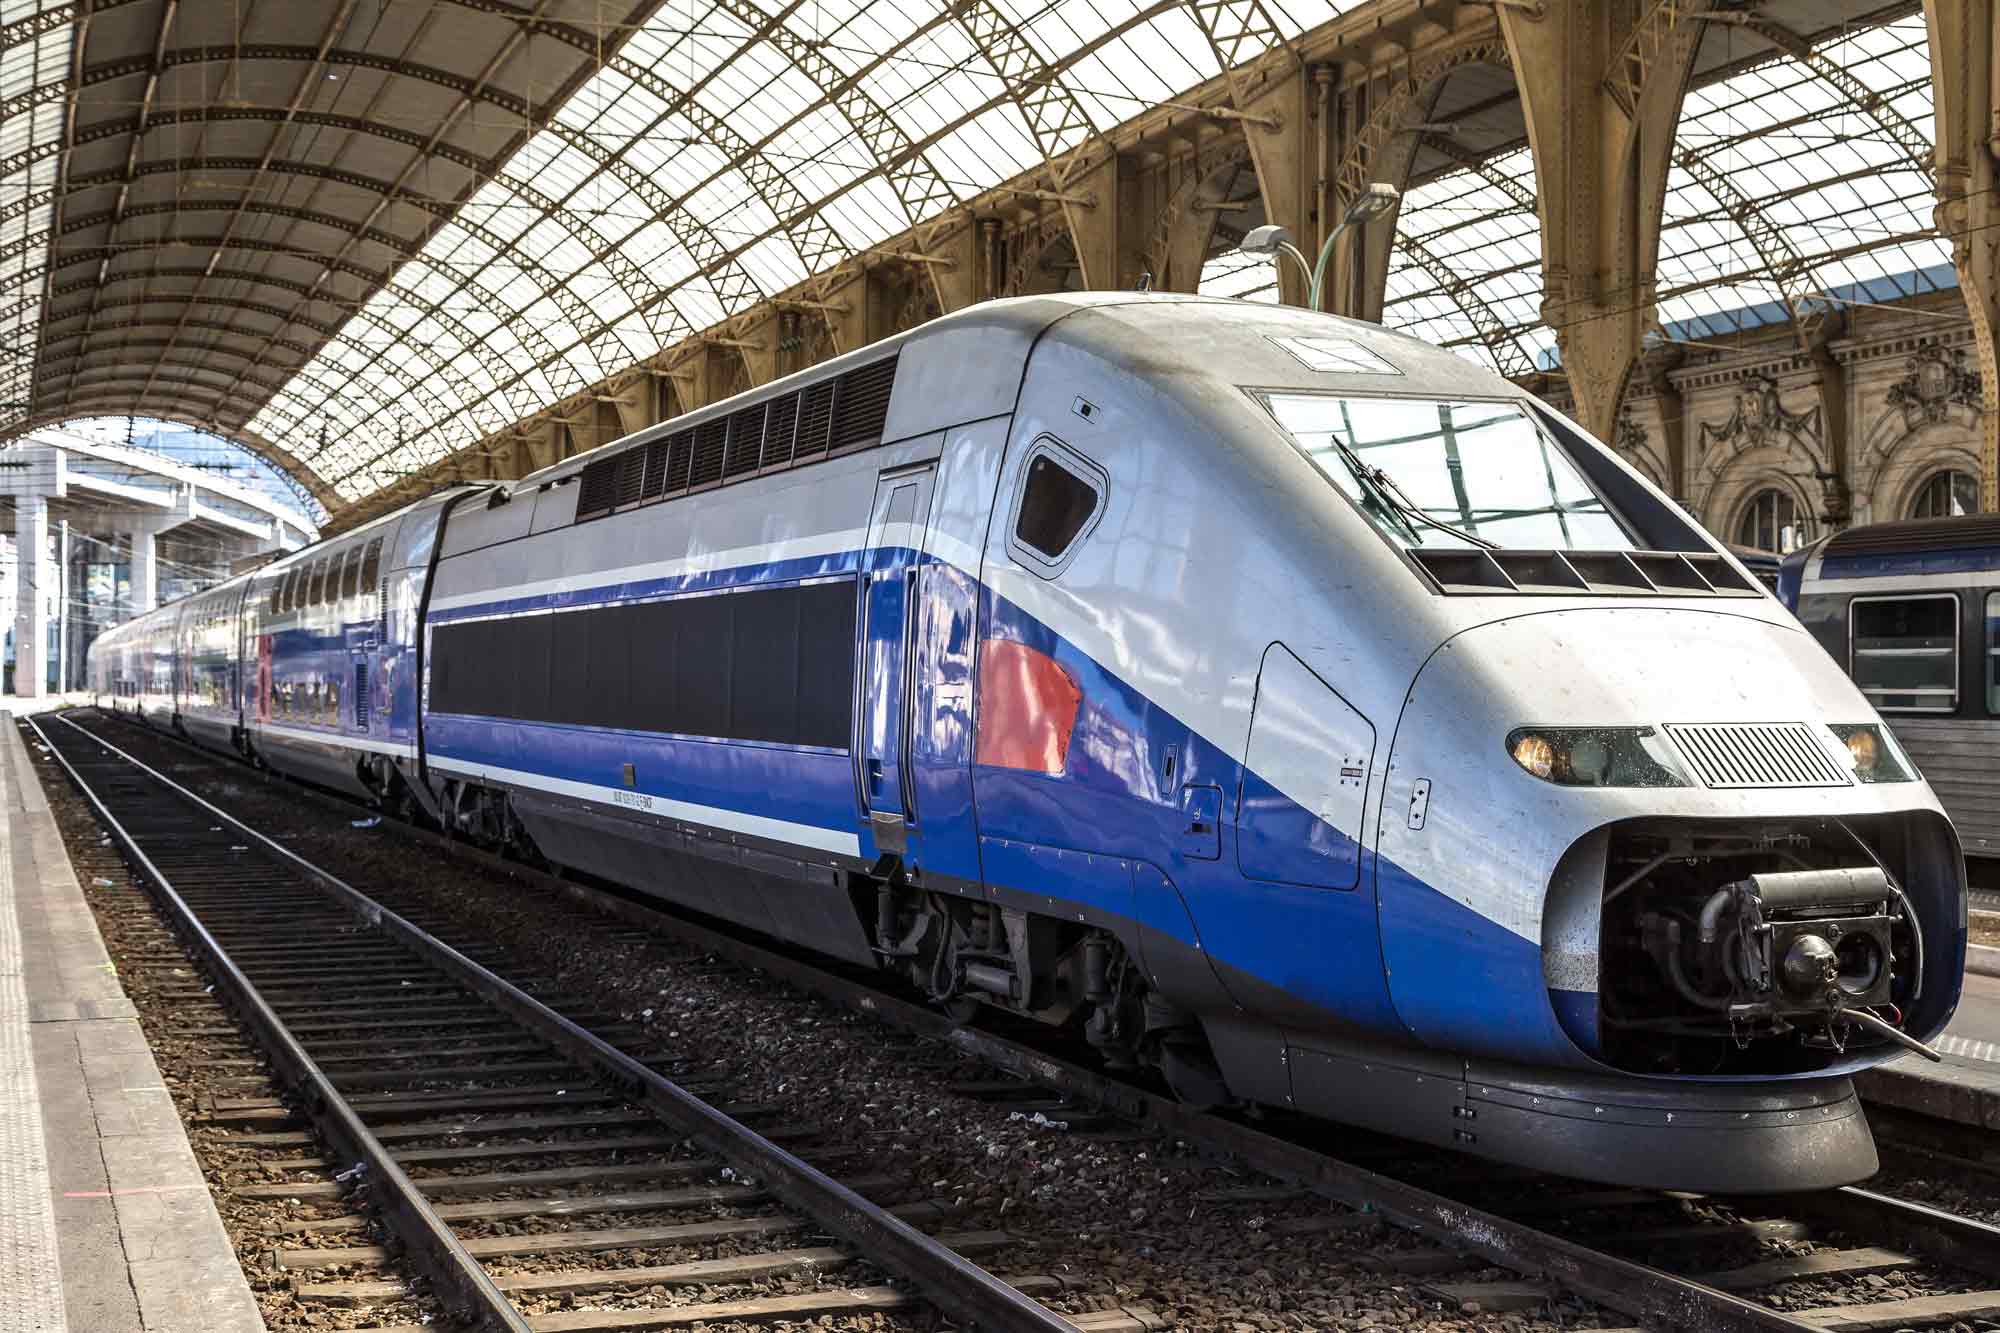 TGV Trains | Cheap Tickets for High-Speed Trains in France | Trainline